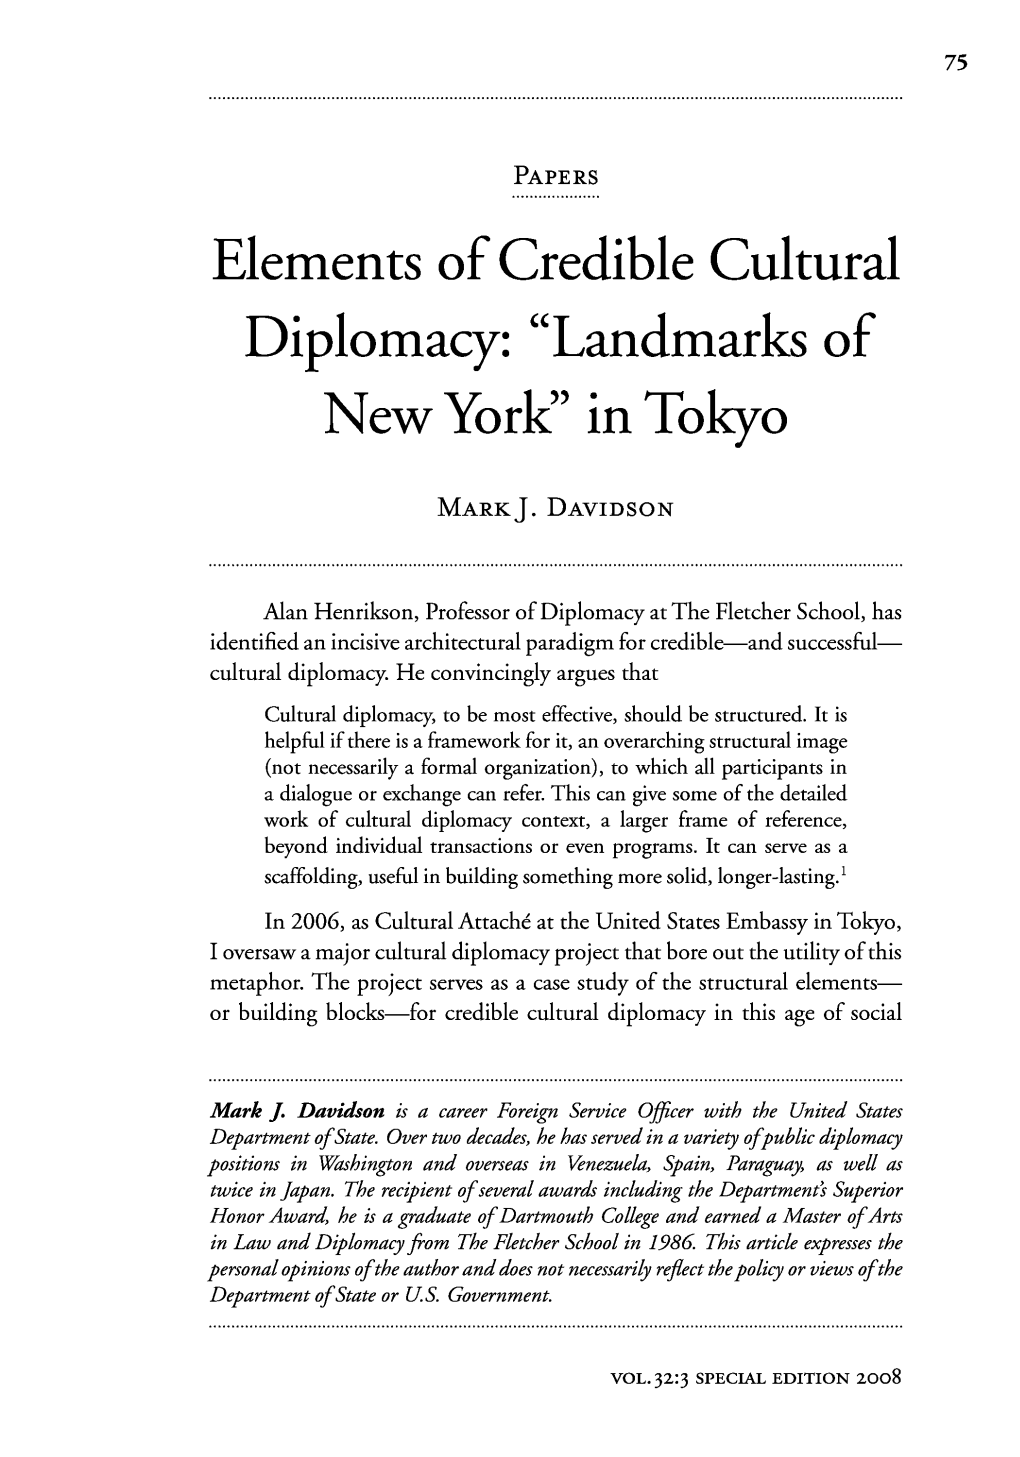 Elements of Credible Cultural Diplomacy: Landmarks of New York